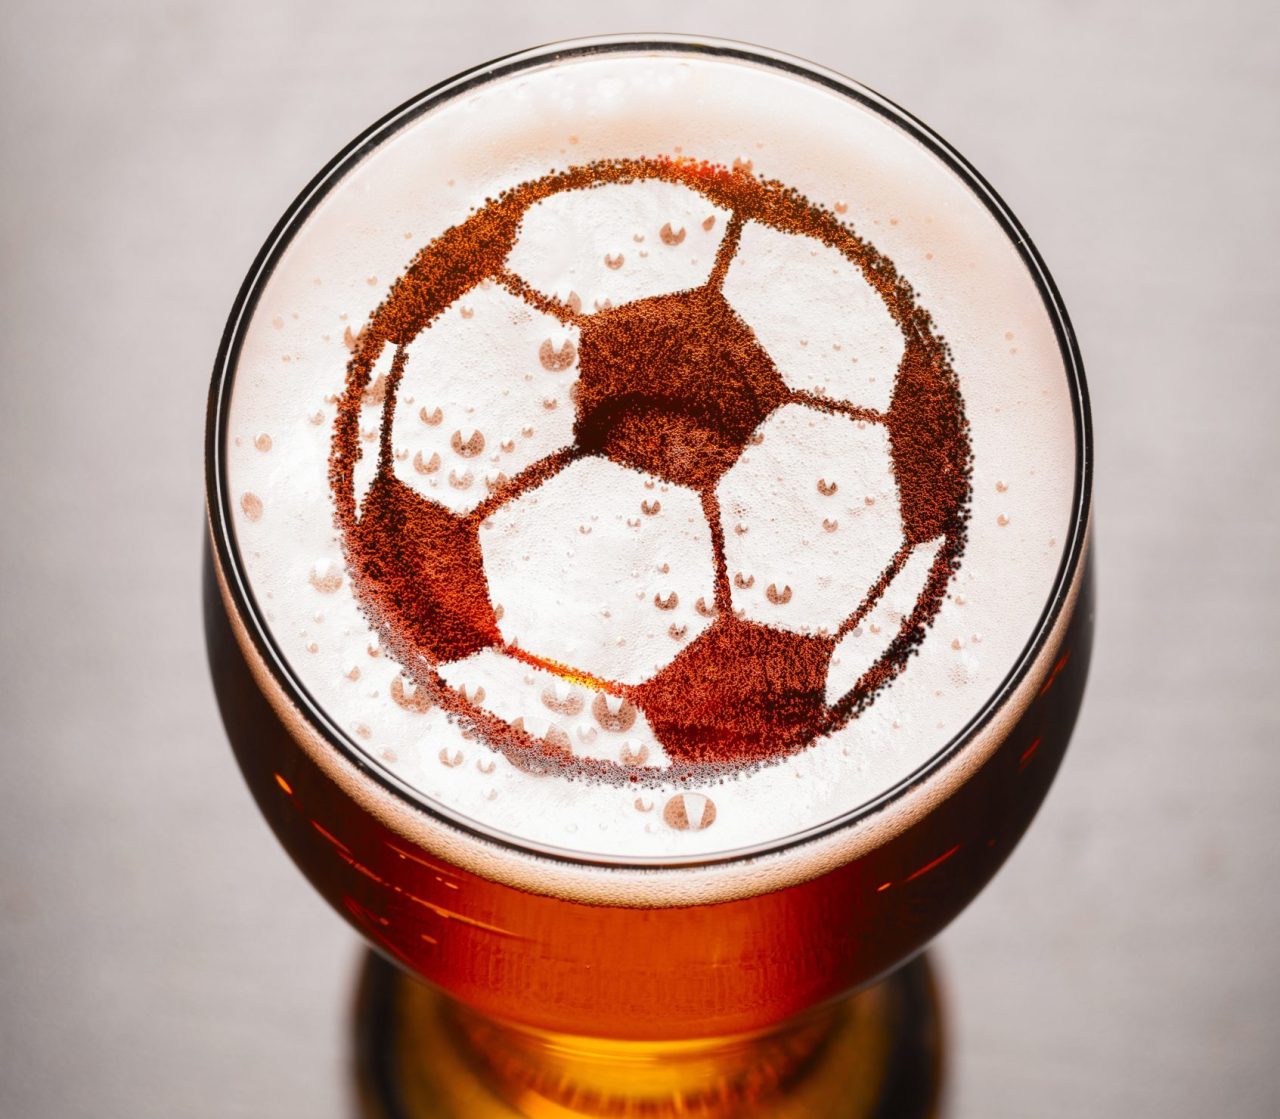 Brits to spend £2.4 billion on beer during Euros 2024 tournament